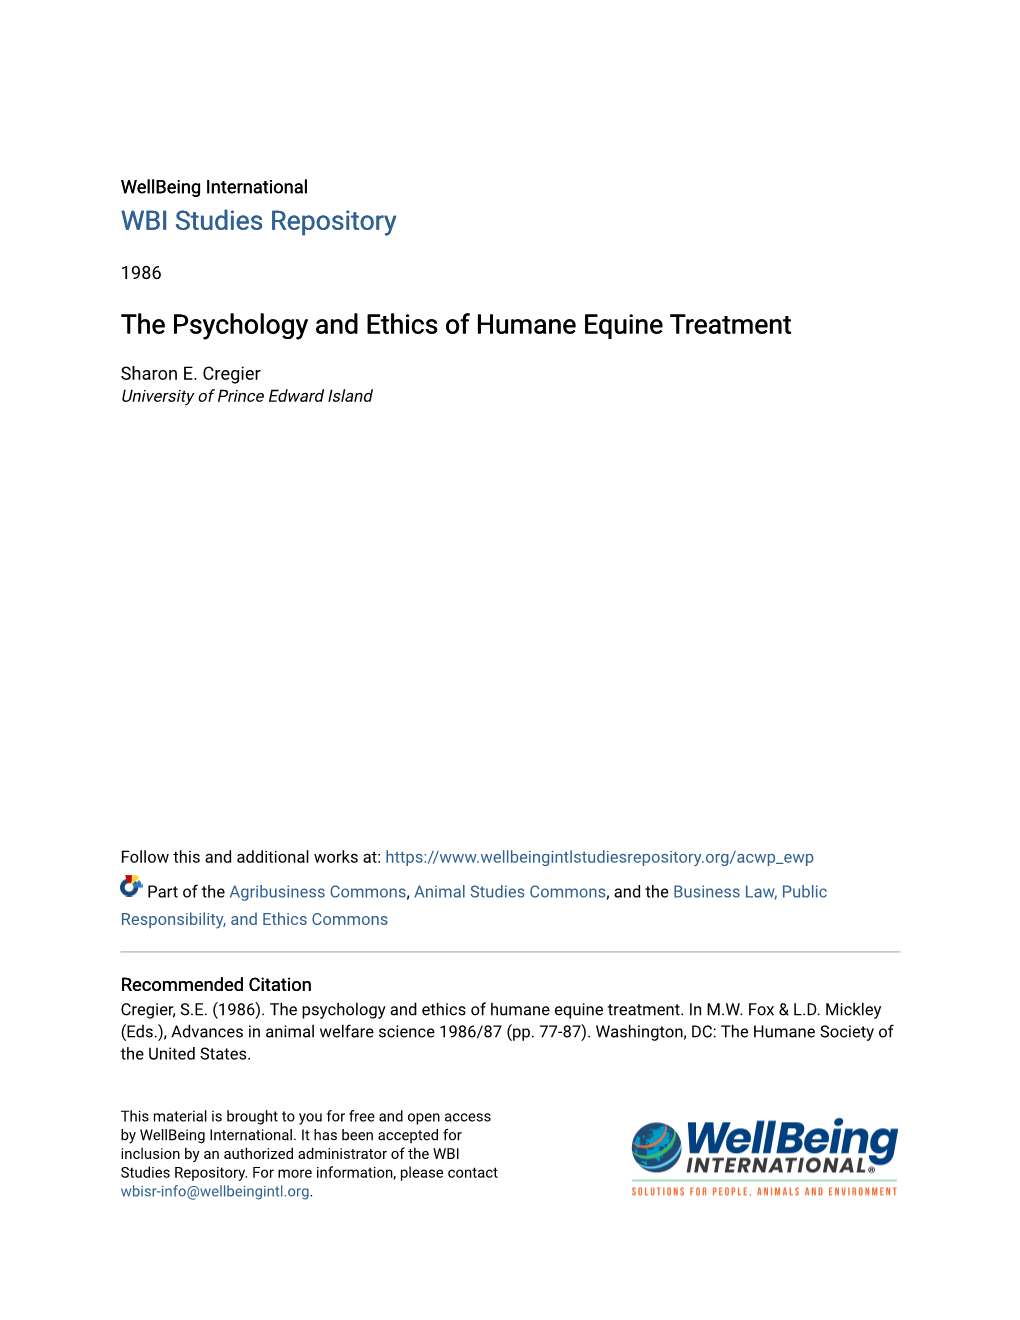 The Psychology and Ethics of Humane Equine Treatment